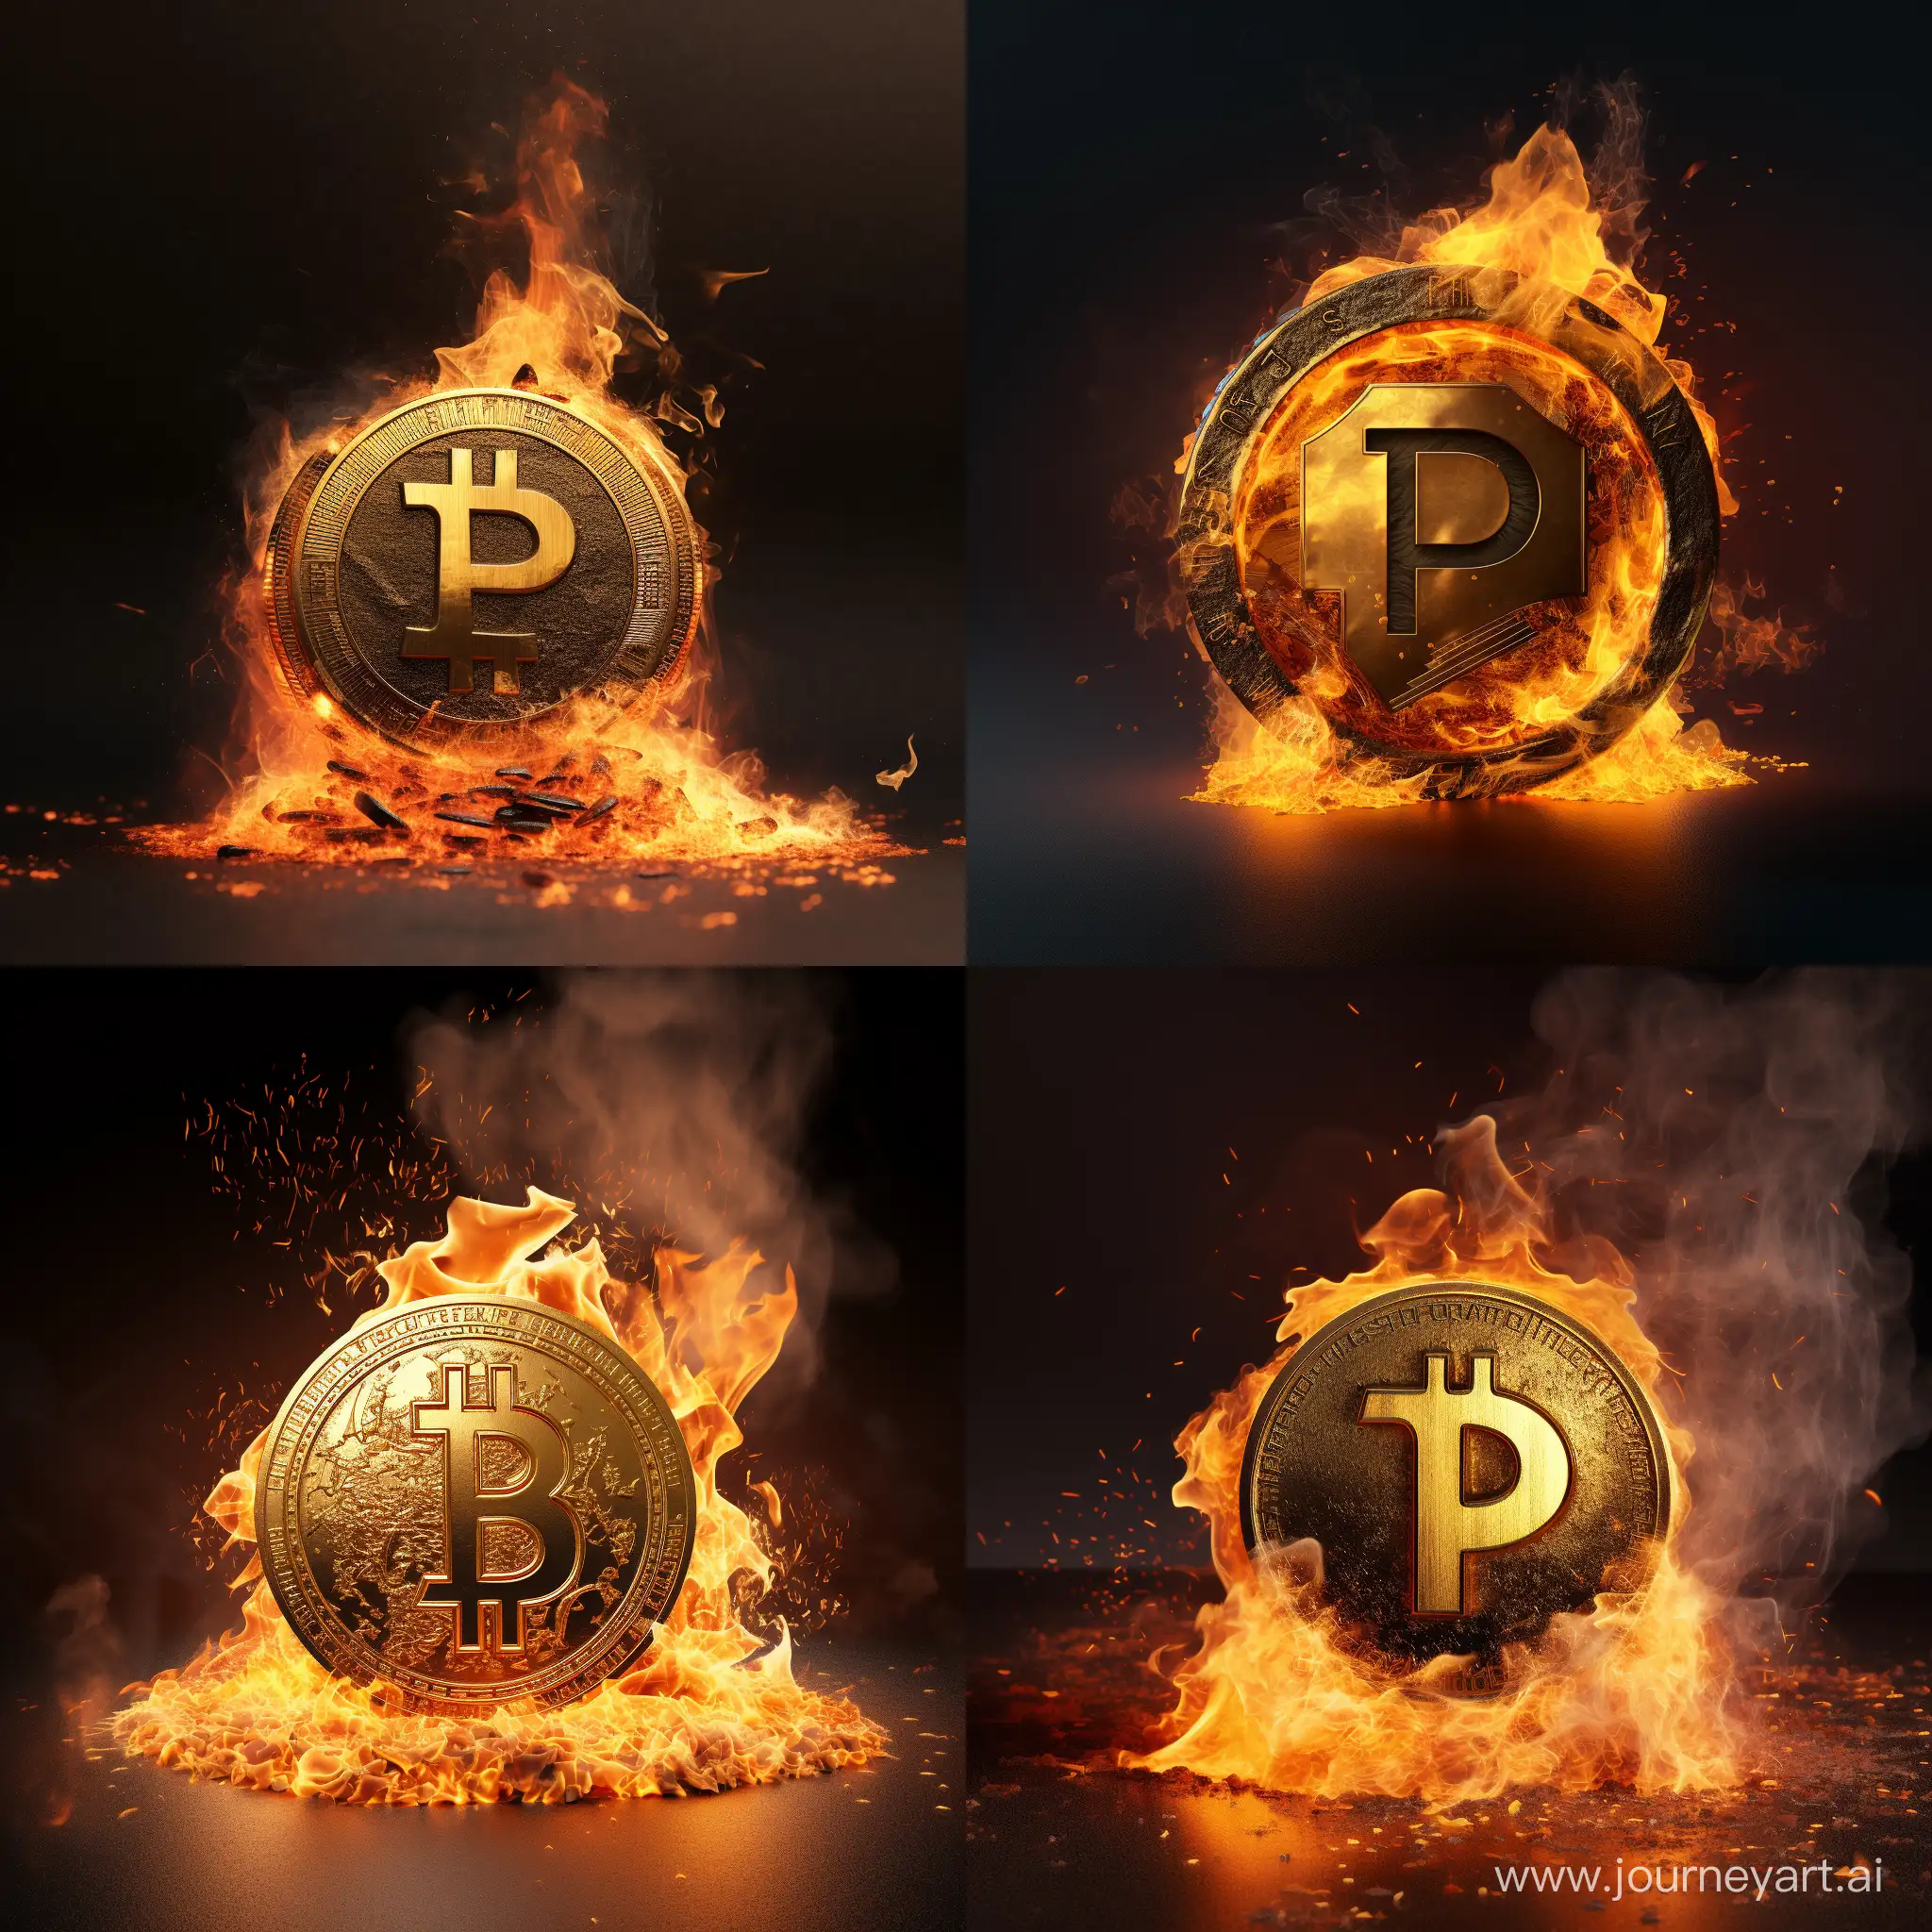 burning gold pyro crypto coin with a "P" on it